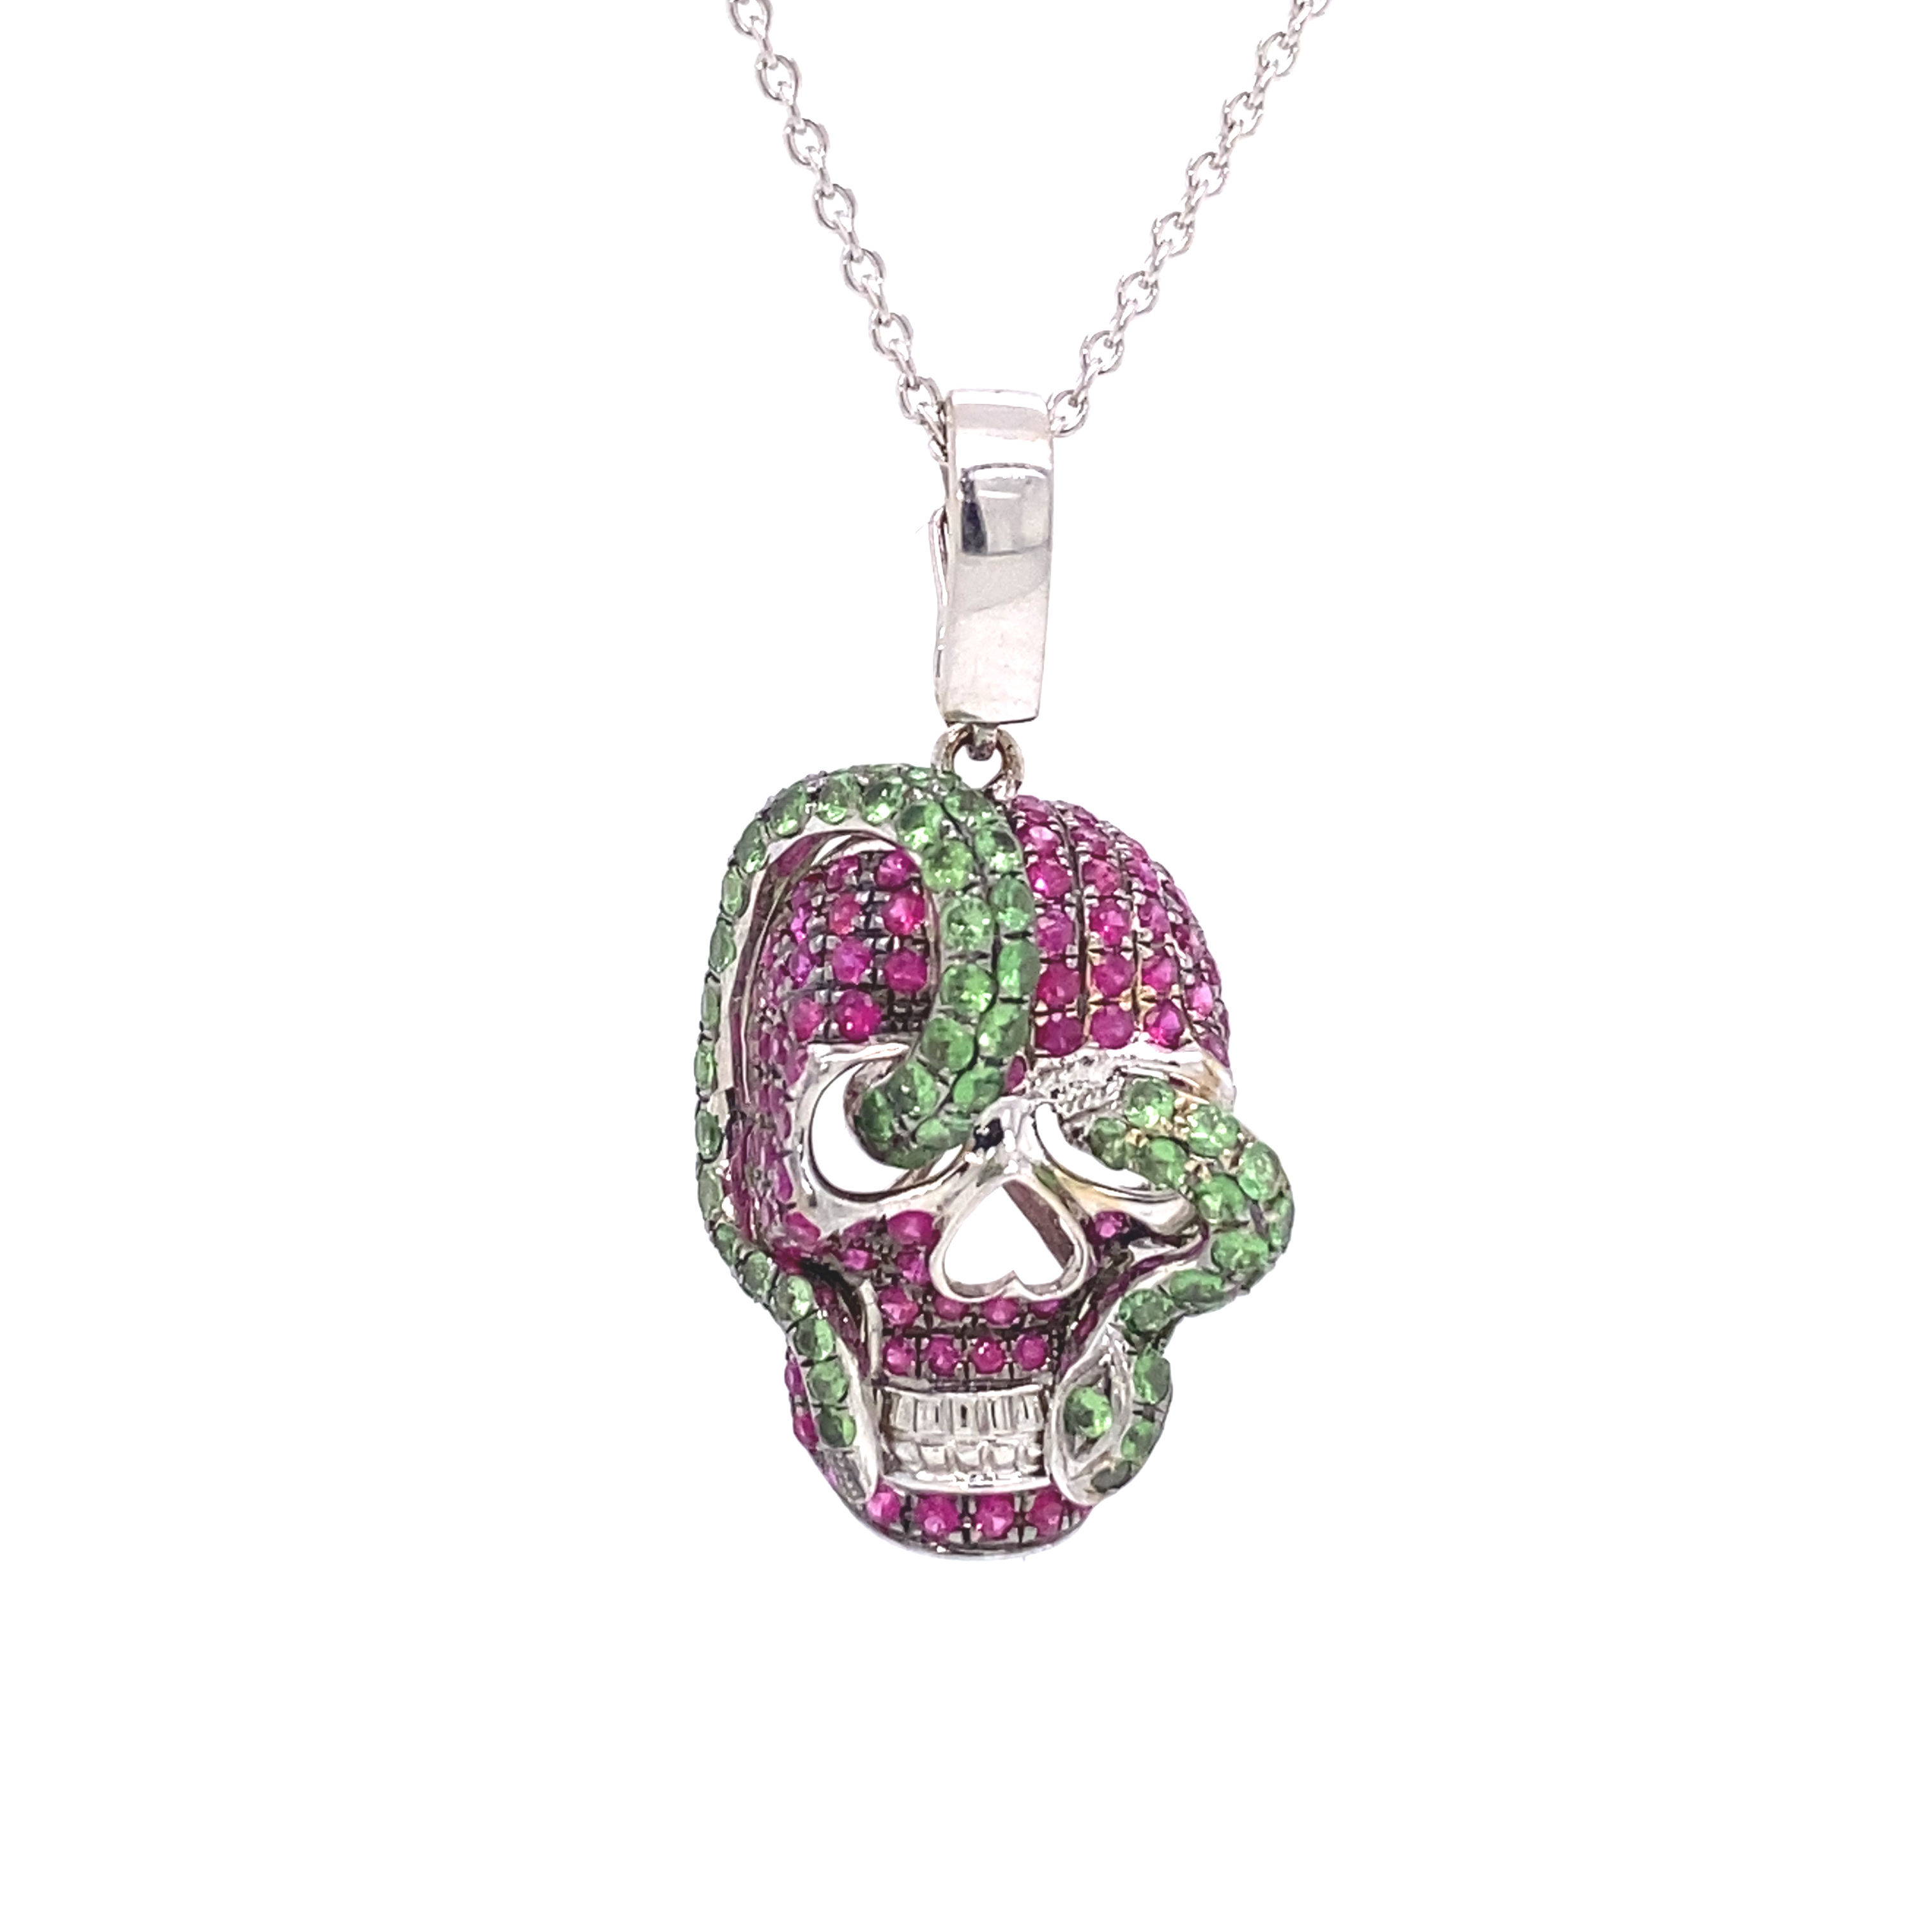 18K White Gold Skull with Olive Green Peridot total 1.30ct. & Fancy Pink Sapphire total 2.00ct. Open back hinge makes it possble to also hang on pearl strands 🤩